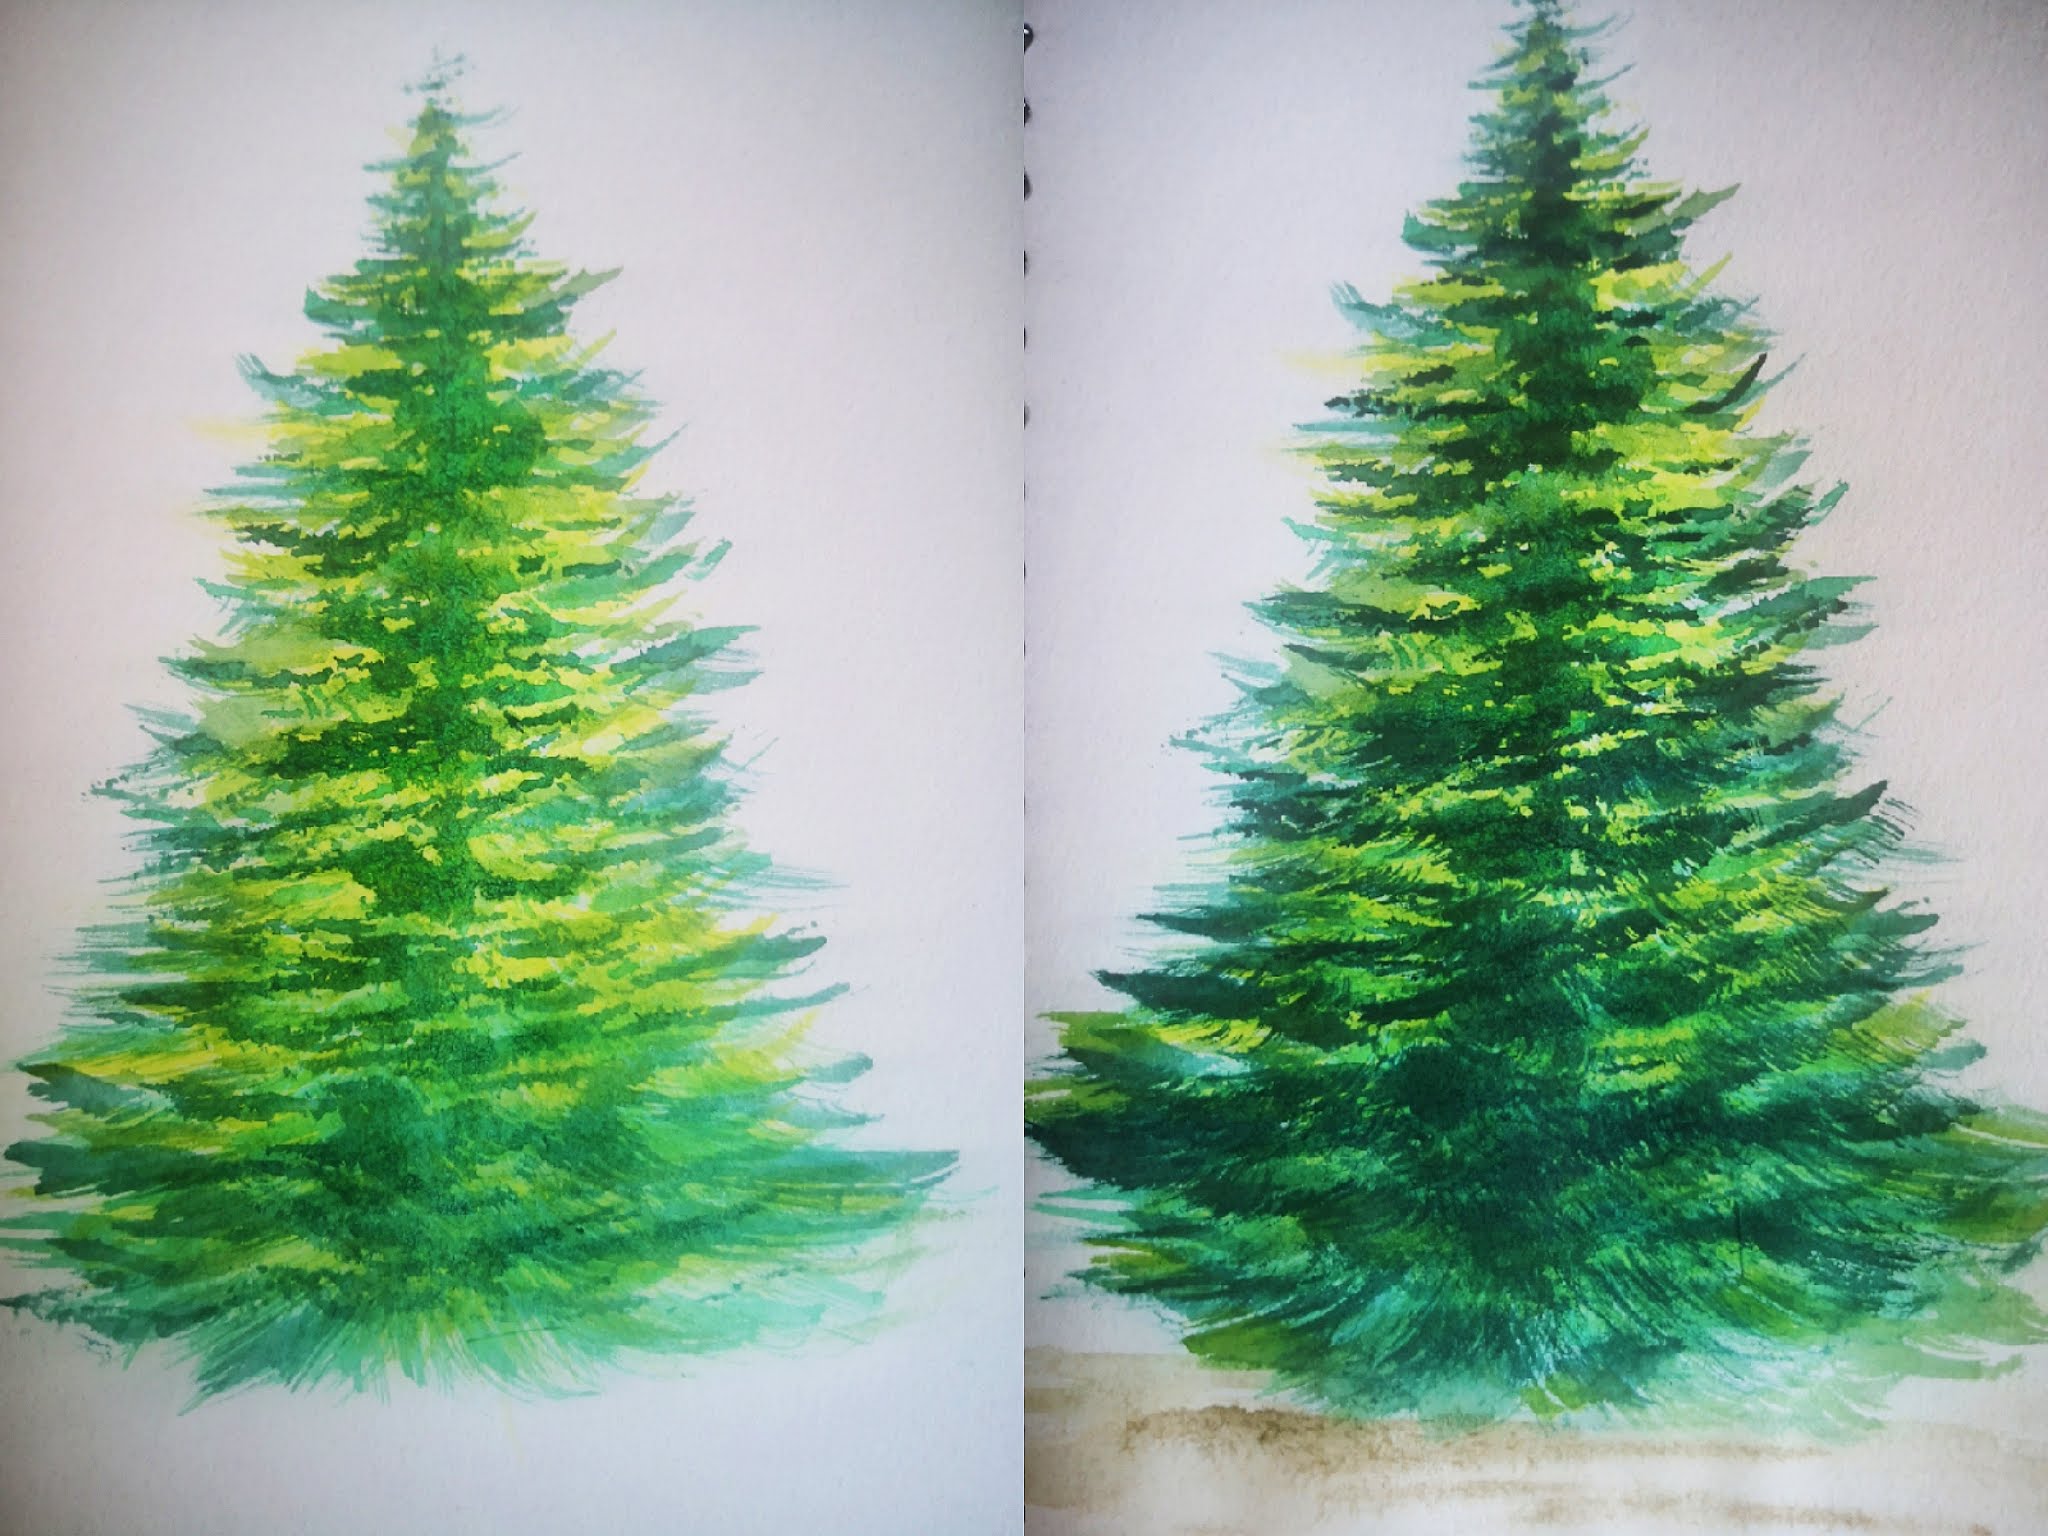 How to Draw a pine tree in watercolor. Best ideas for drawing tutorial tree step by step​